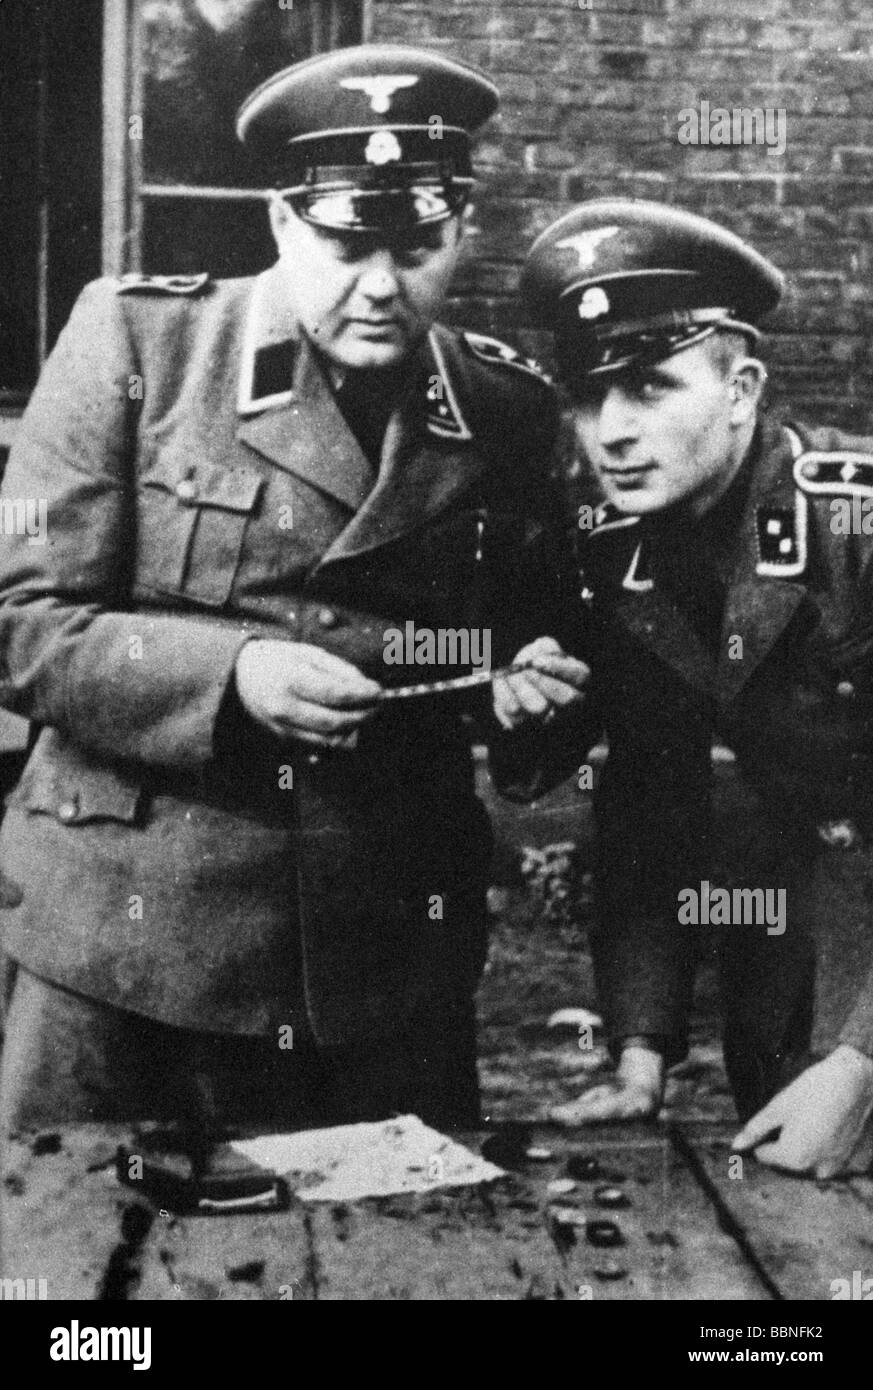 Natíonal Socialism/Nazism, crimes, Auschwitz concentration camp, guards, two NCOs of the SS with valuables of prisoners, circa 1944, Stock Photo